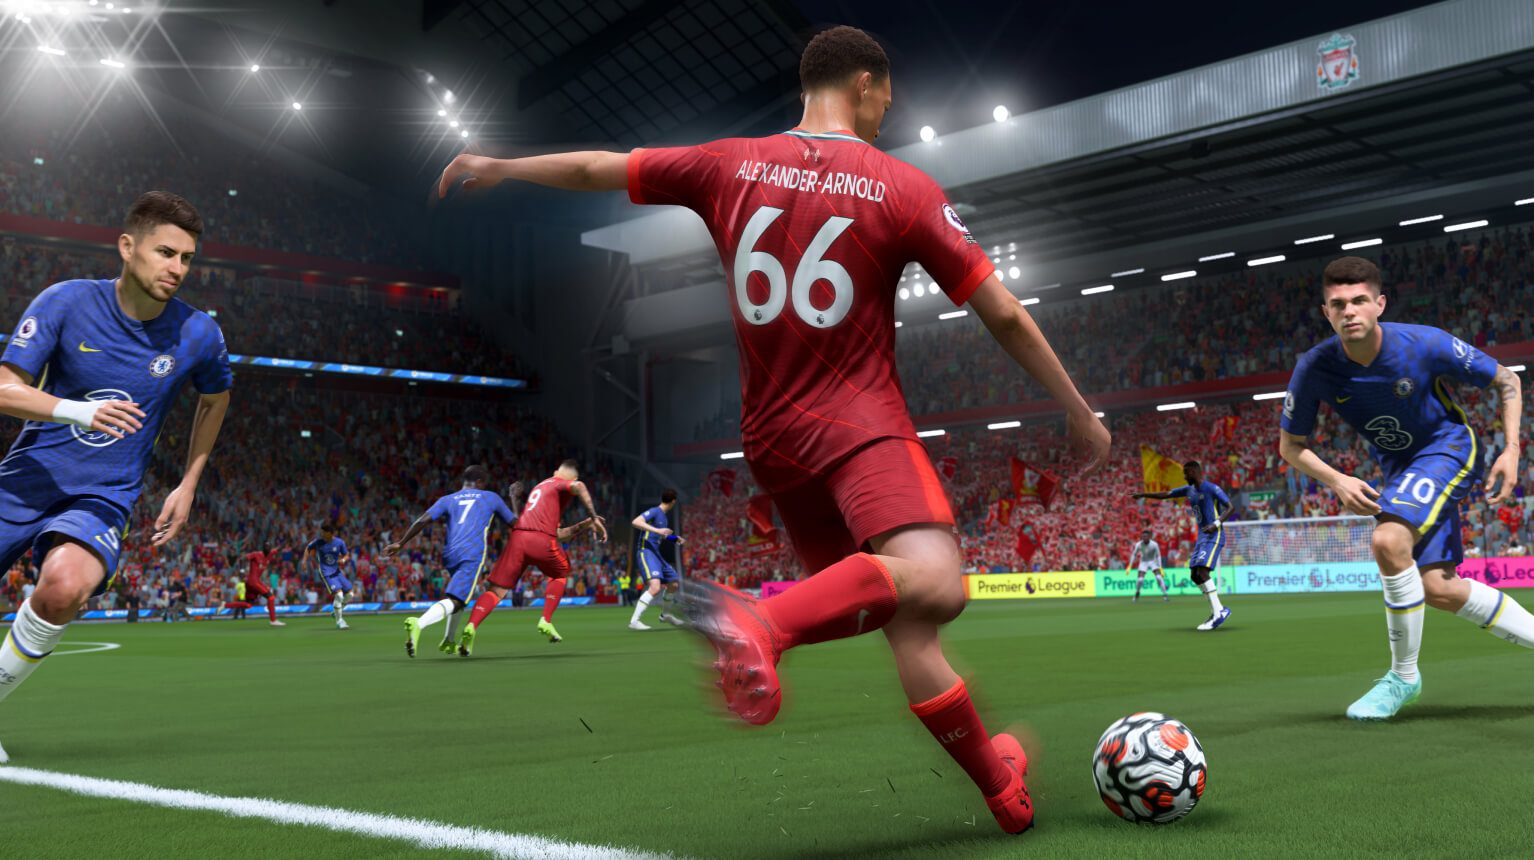 FIFA 22 - All Leagues and Clubs - EA SPORTS Official Site